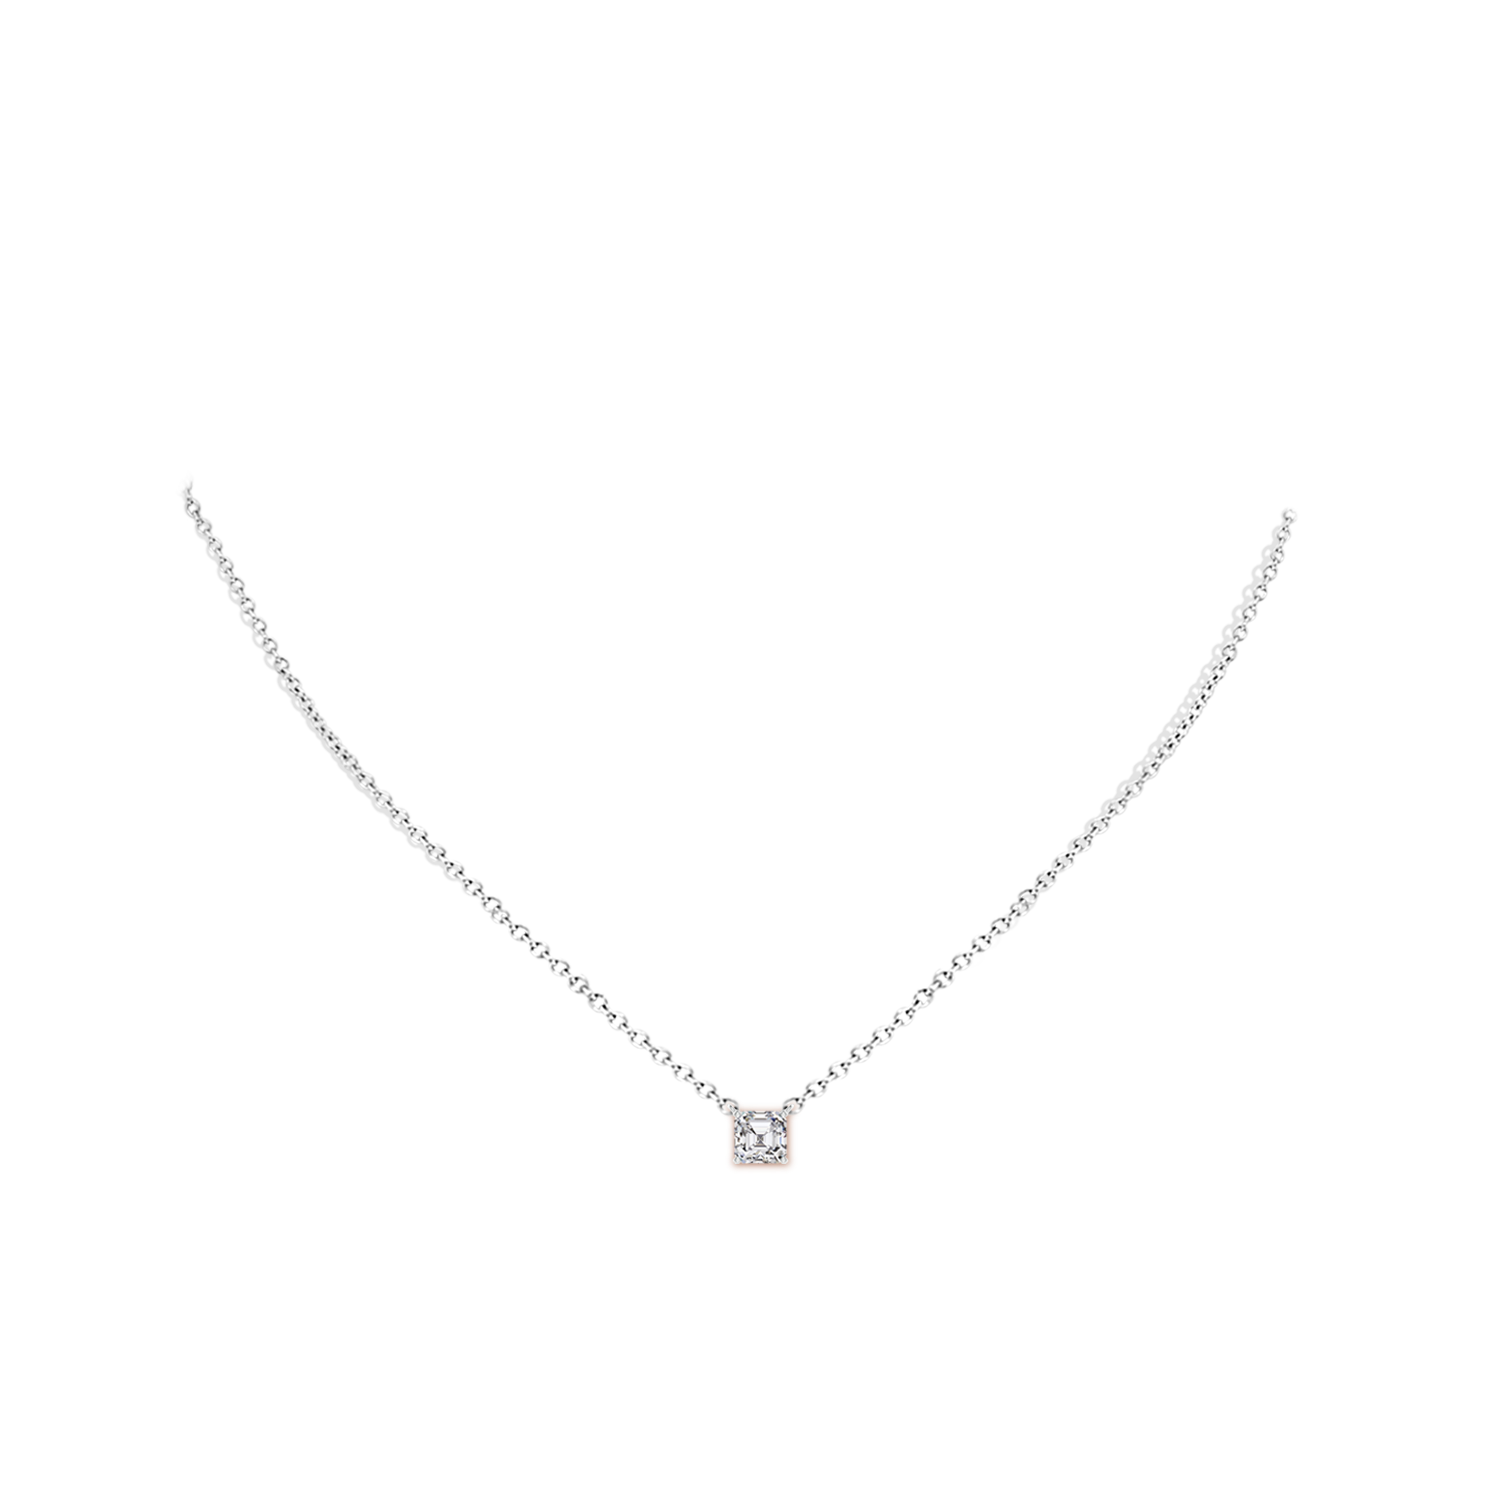 H, SI2 / 3 CT / 14 KT White Gold